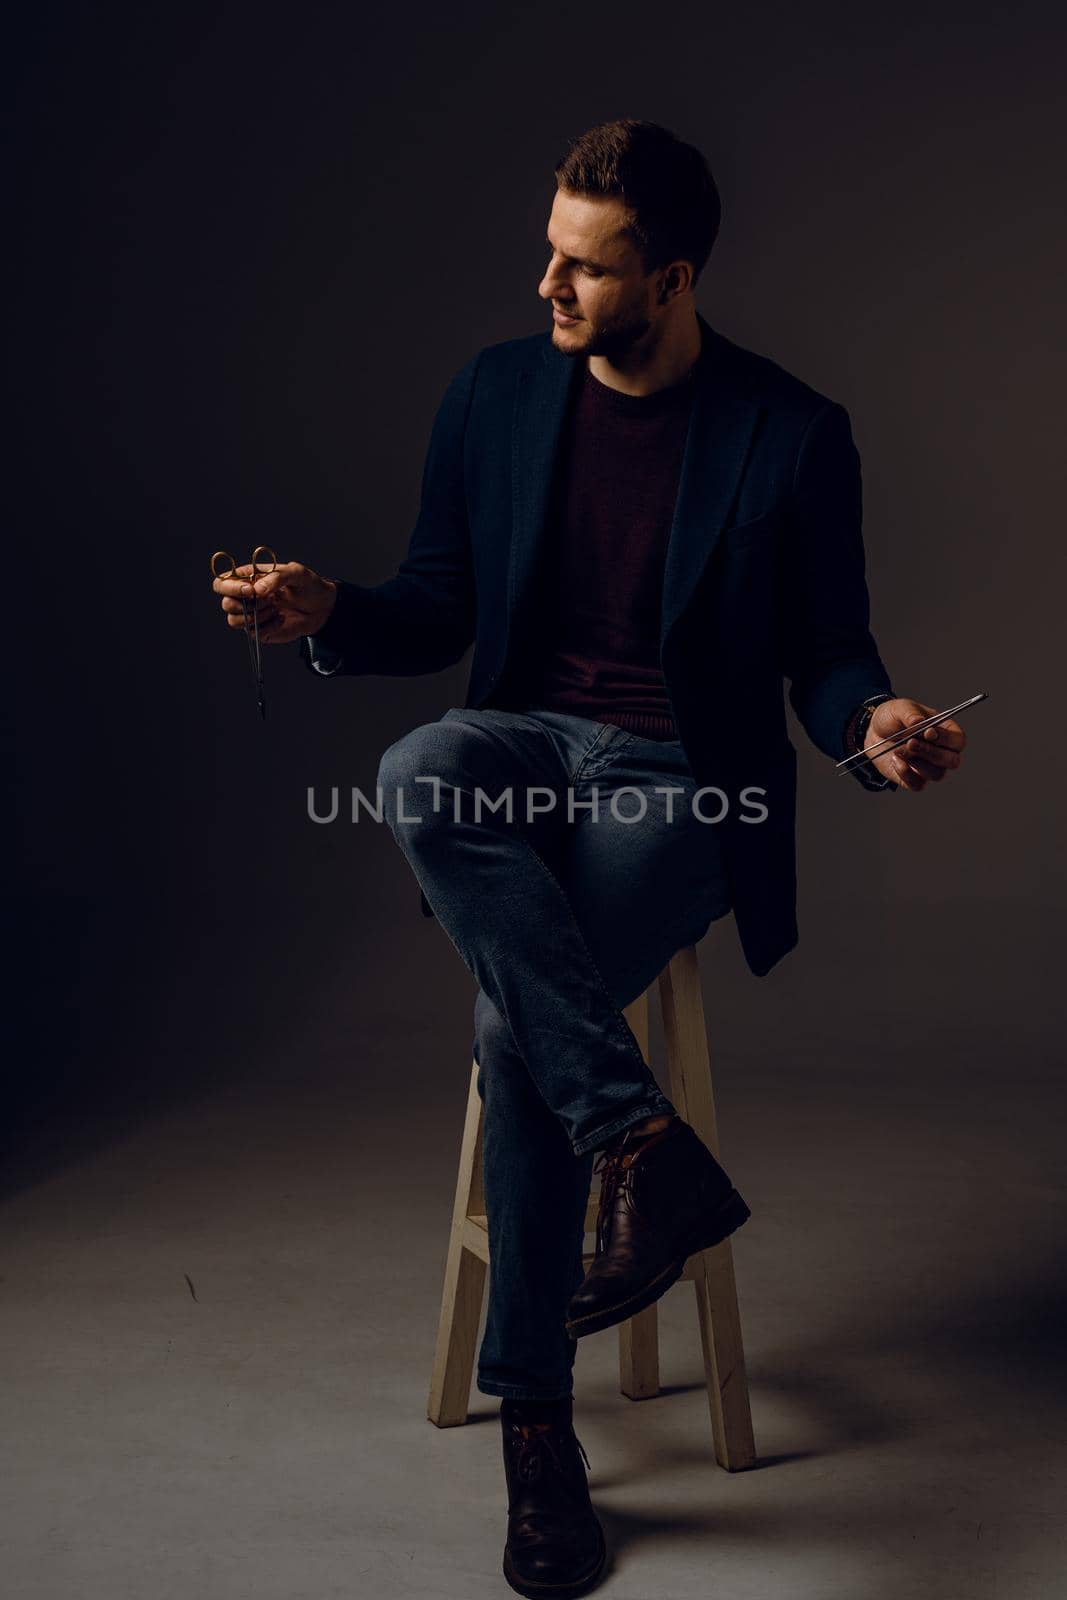 Handsome surgeon with needle holder and surgical knife weared casual suit in studio. Confident business man on dark background